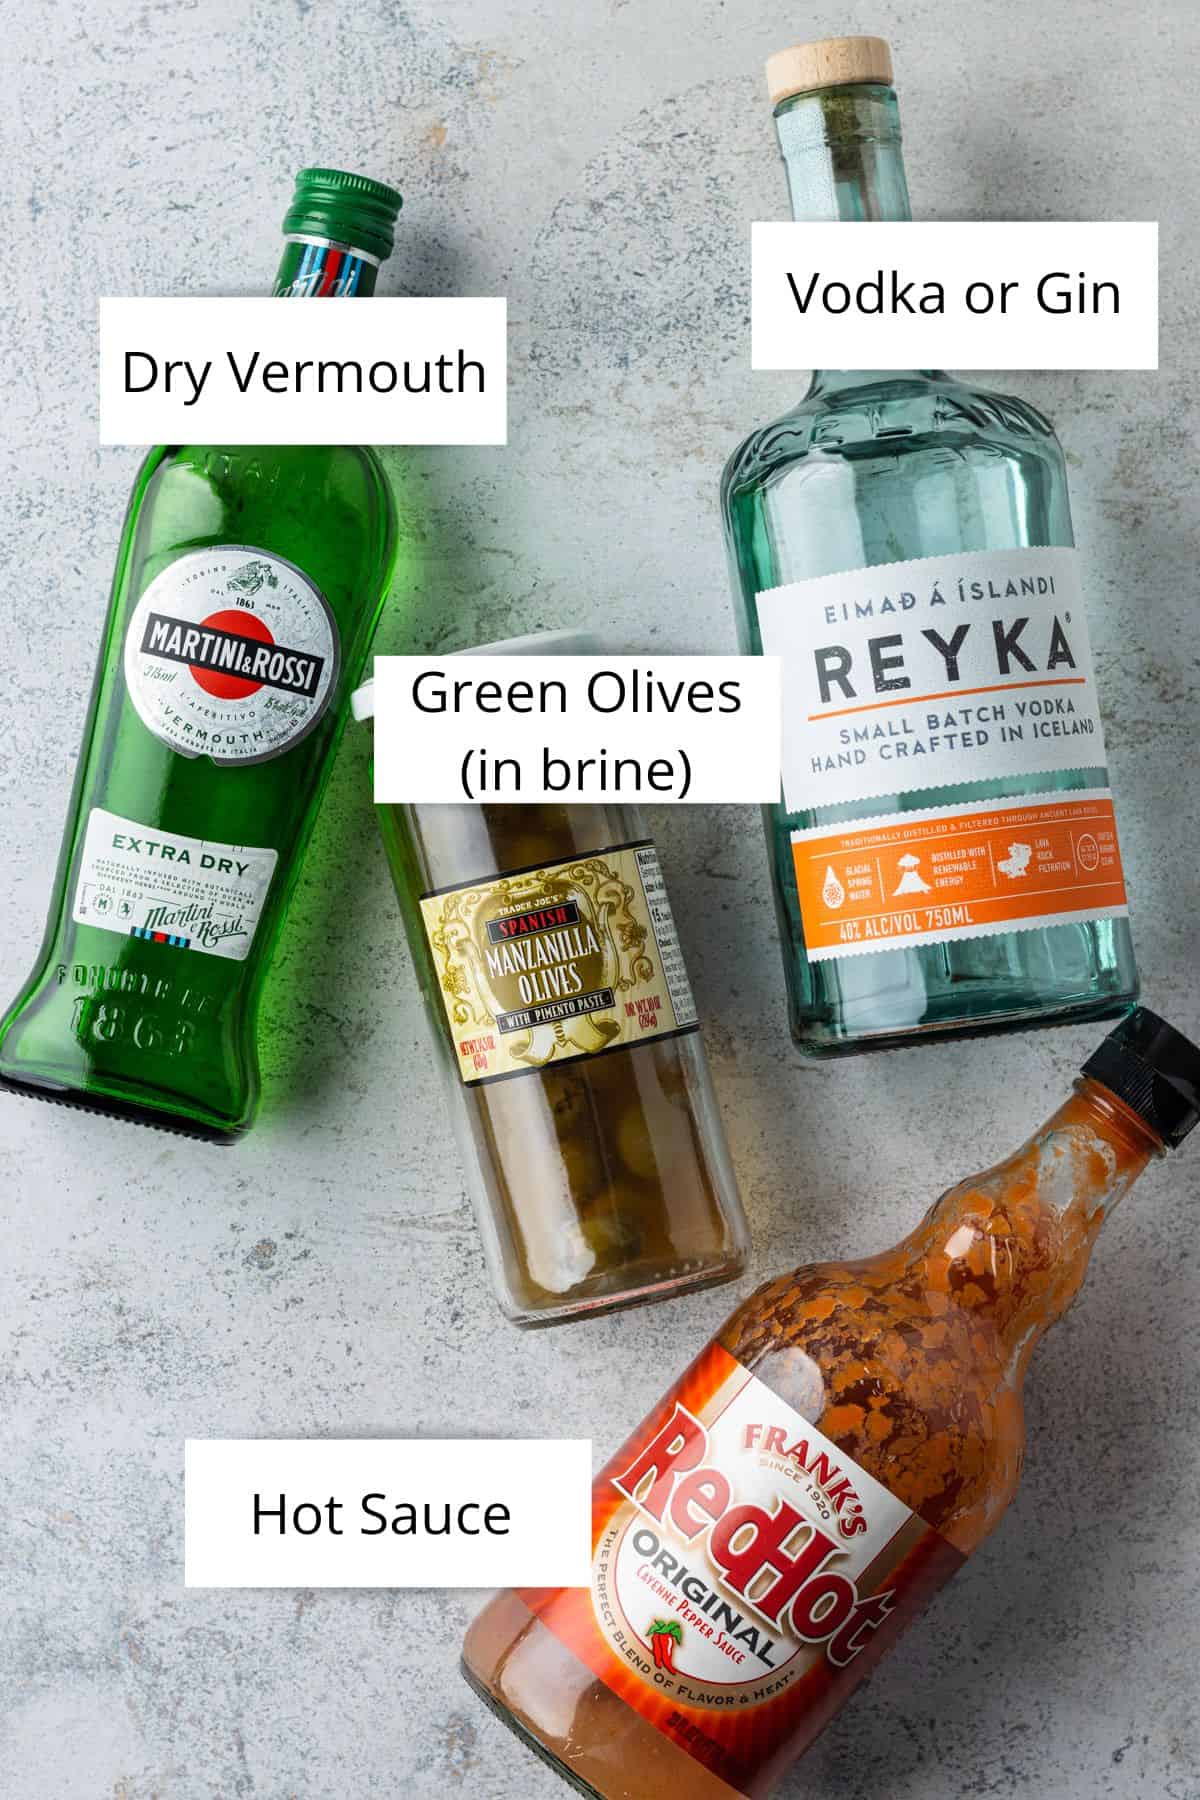 Overhead view of bottles of dry vermouth, vodka, hot sauce and a jar of green olives.